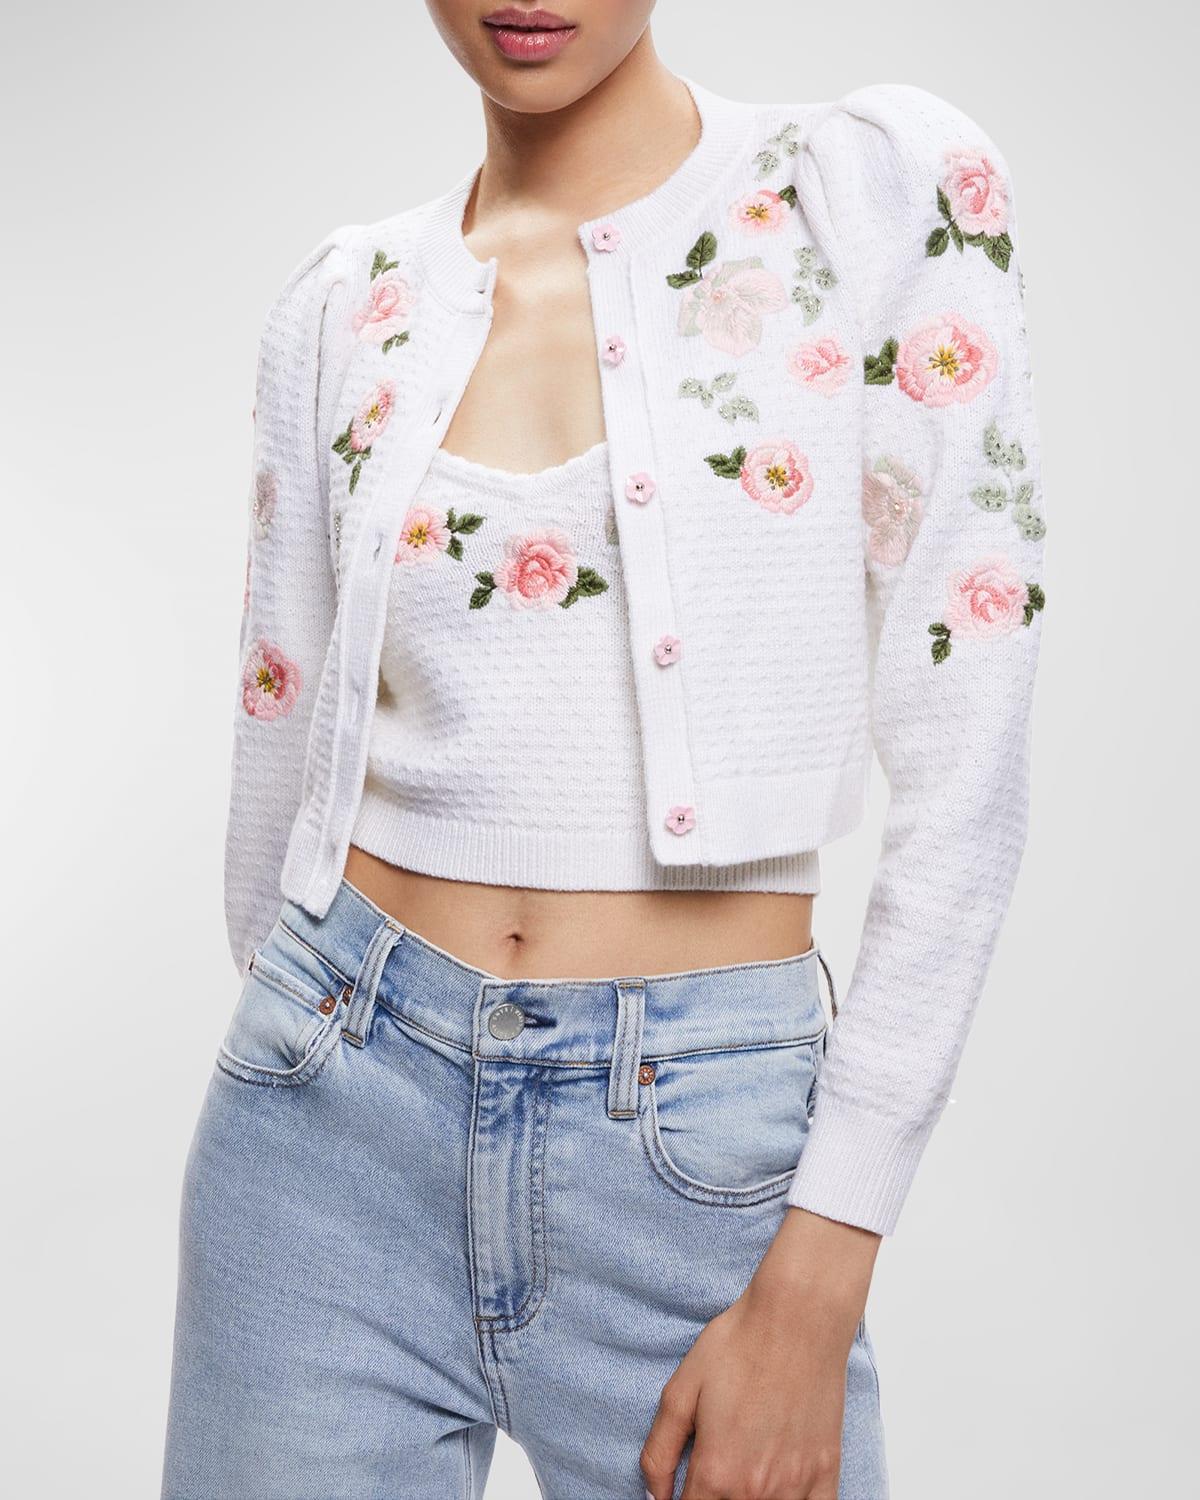 Alice + Olivia Kitty Floral Embroidered Cropped Cardigan in White | Lyst